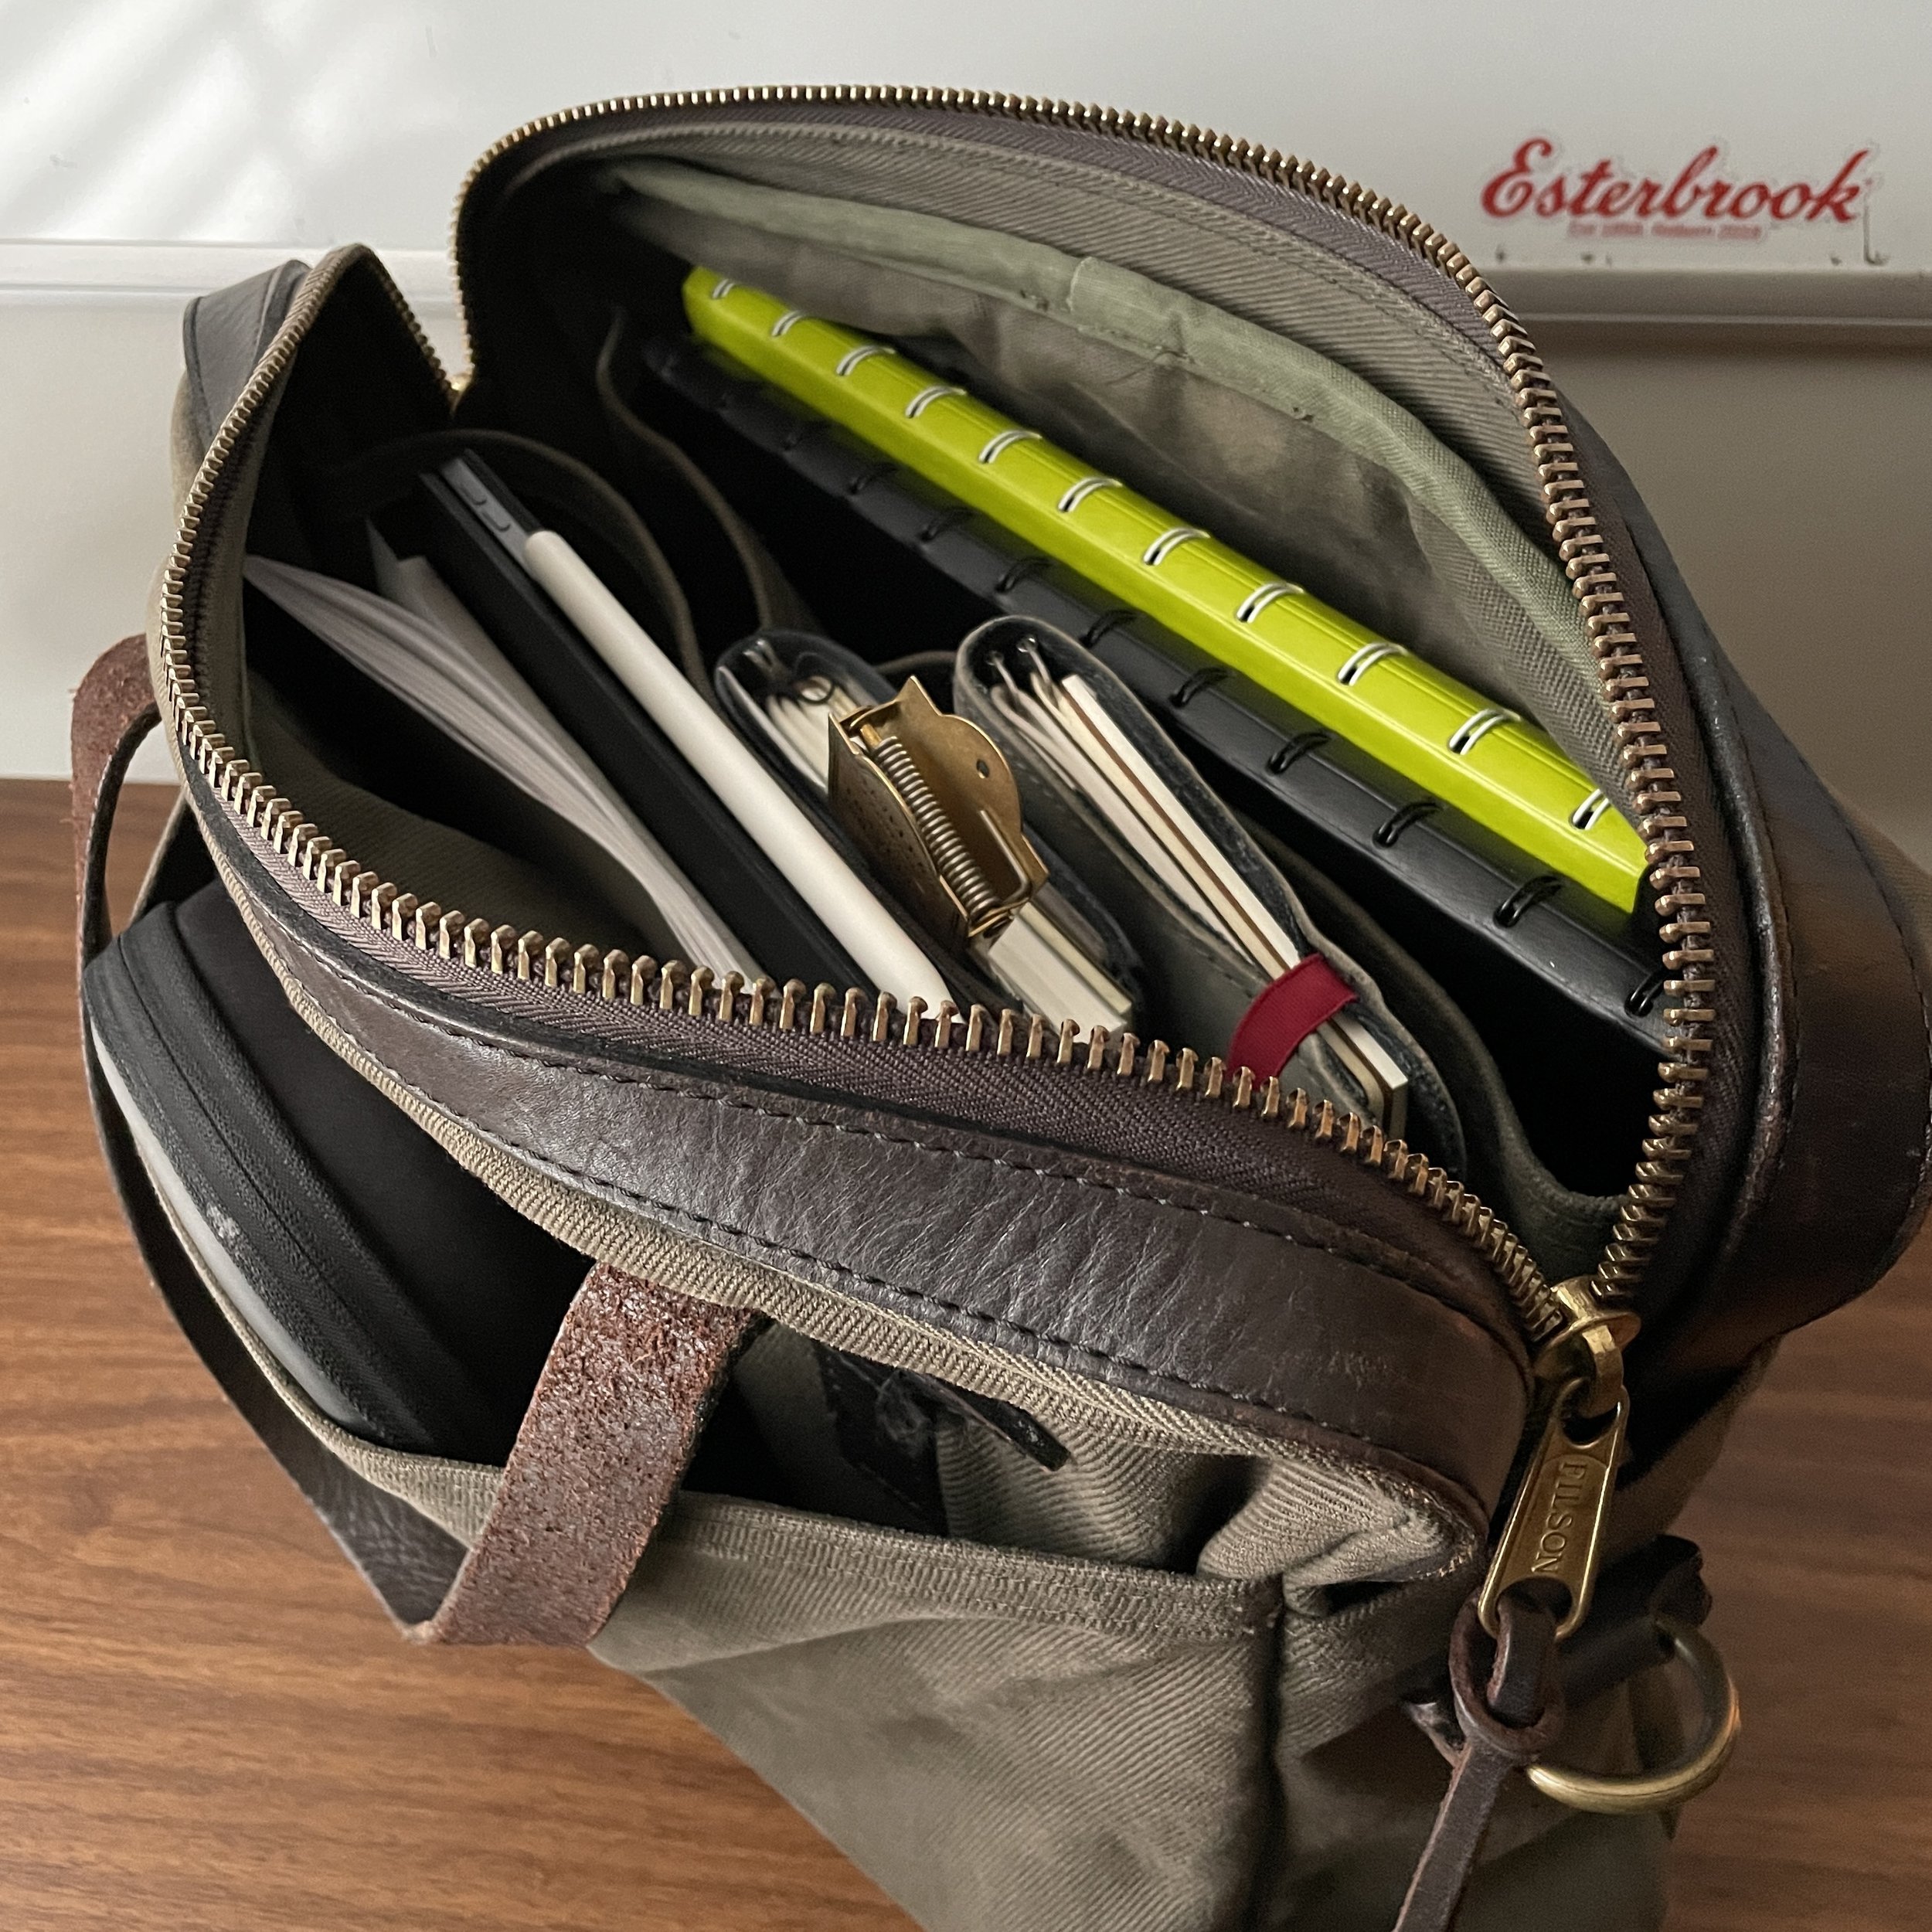 Alleviation Towards Wow What's Inside My Bag? Daily Carry Breakdown 2021 — The Gentleman Stationer